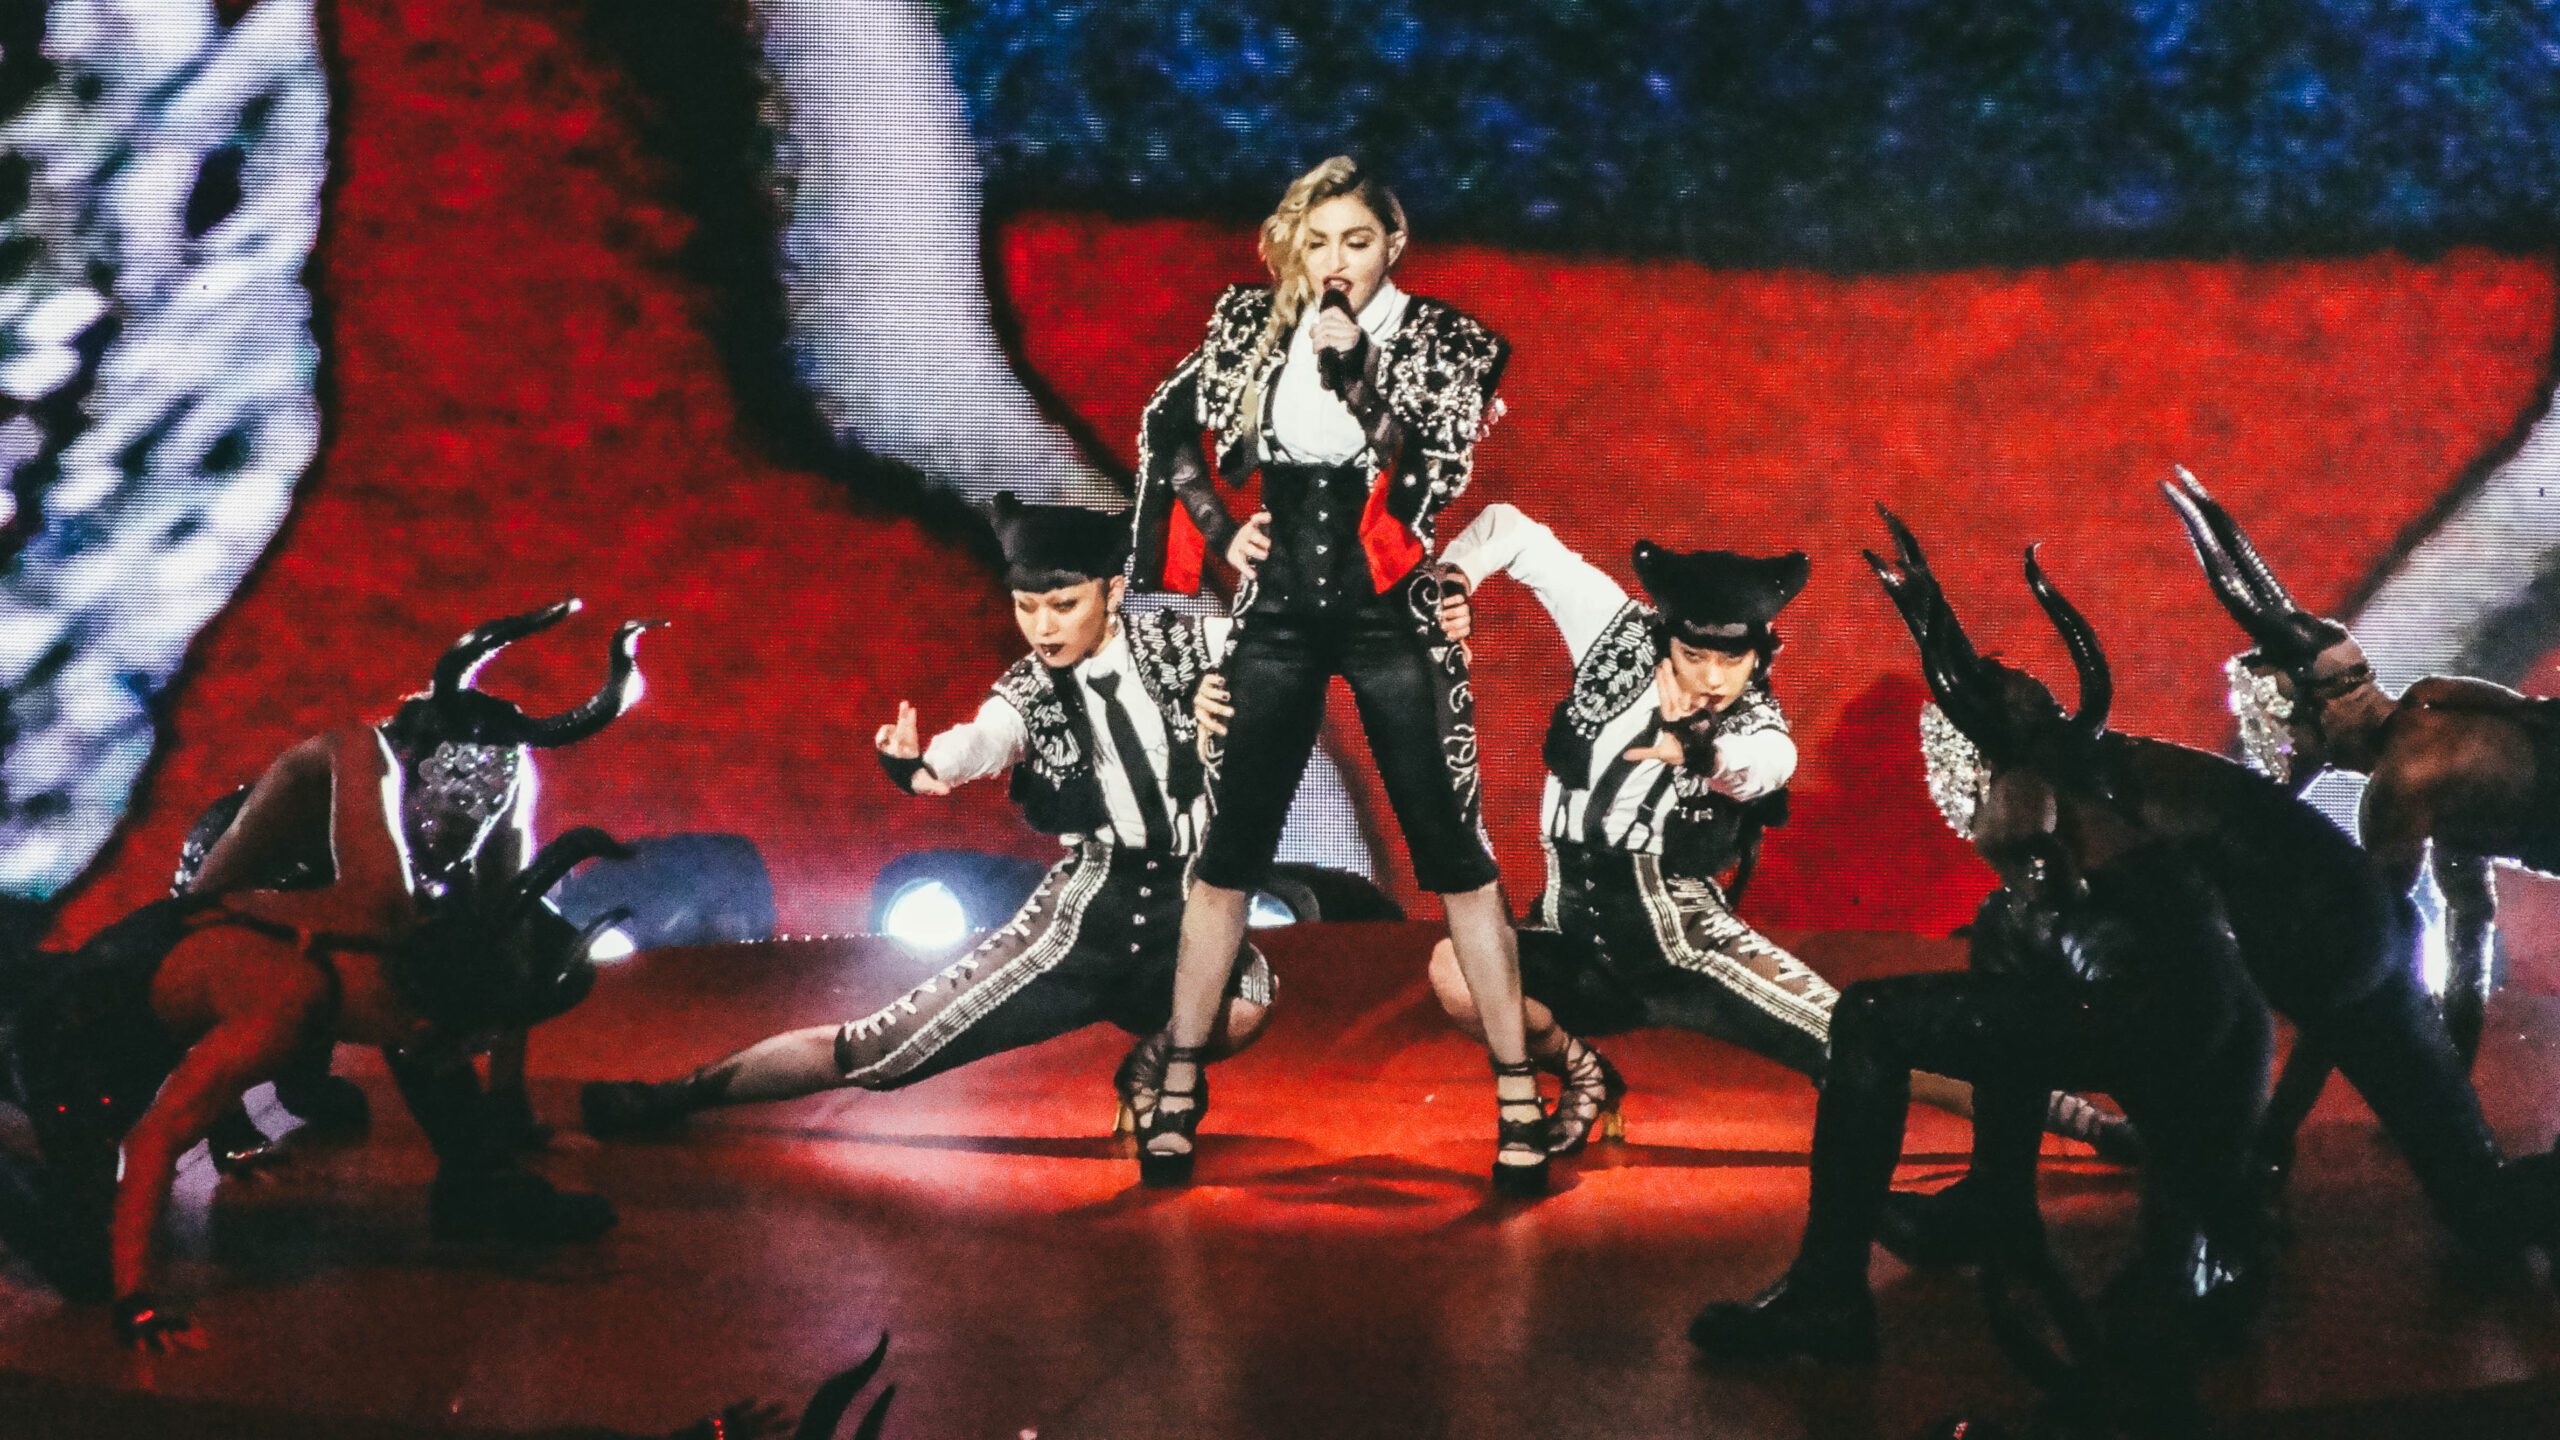 IN PHOTOS: 10 dazzling moments from Madonna’s ‘Rebel Heart’ Manila concert, day 2